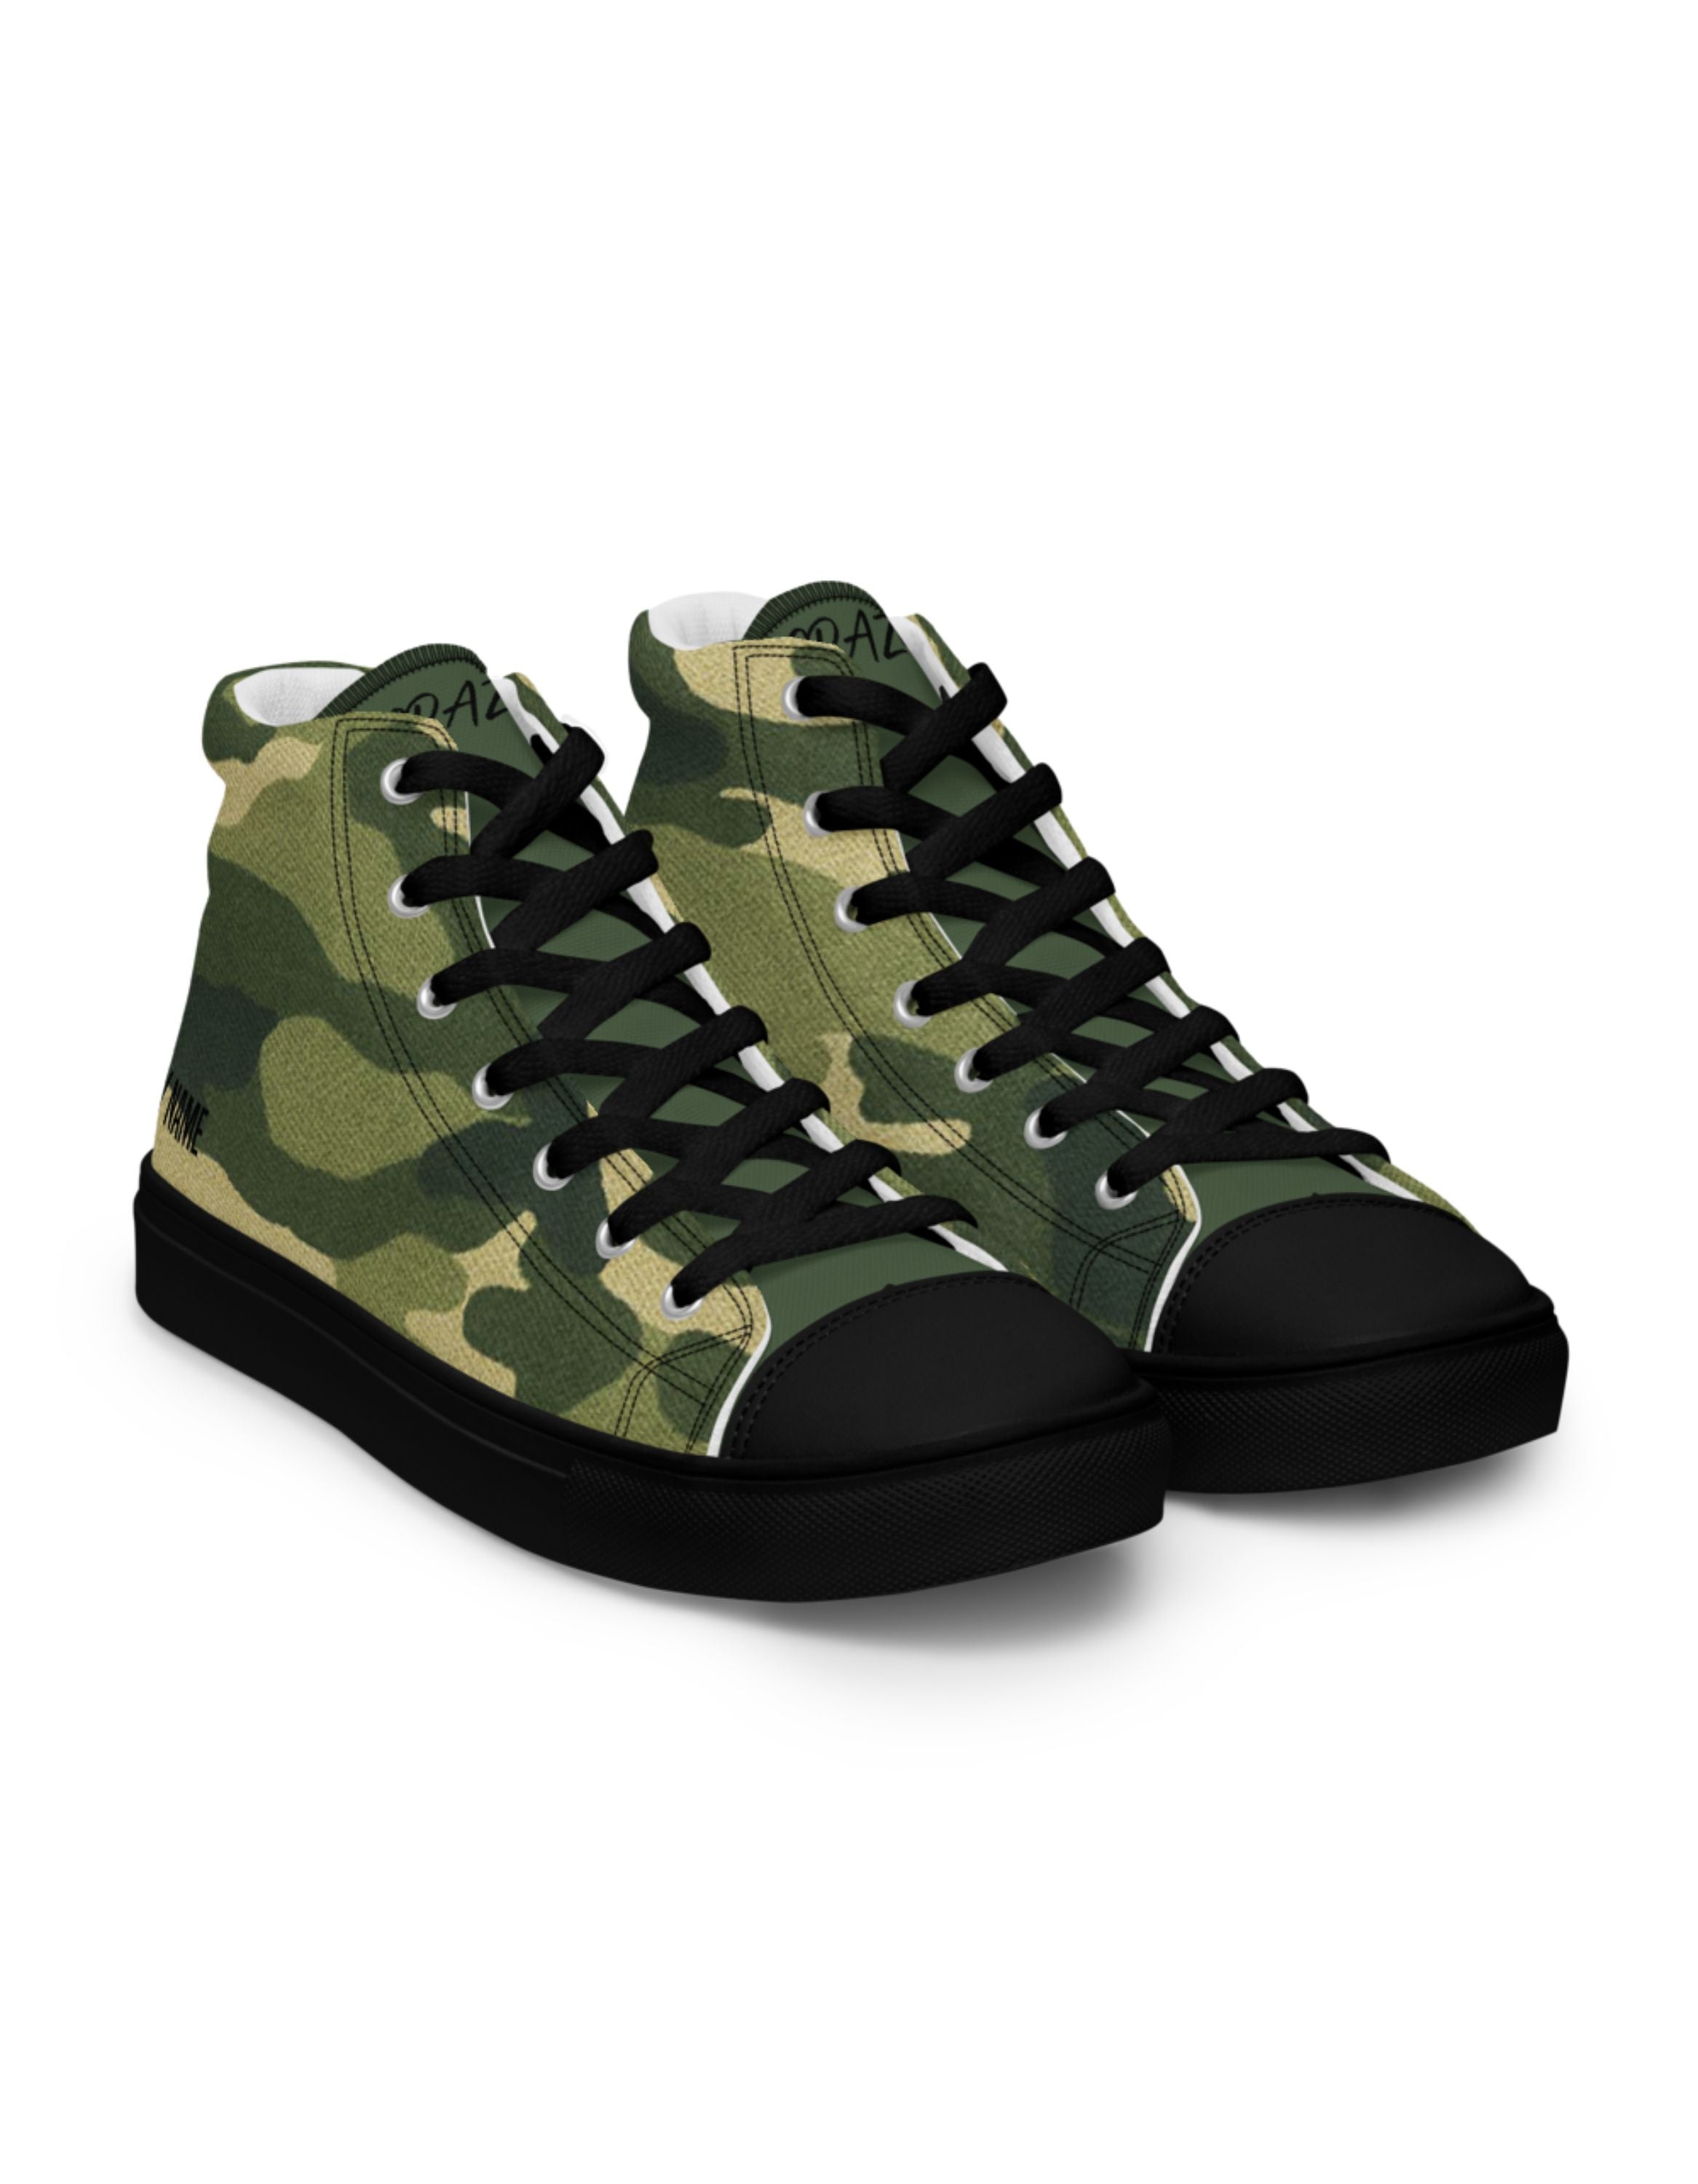 Women's high-top green camouflage canvas sneakers "SAY MY NAME"